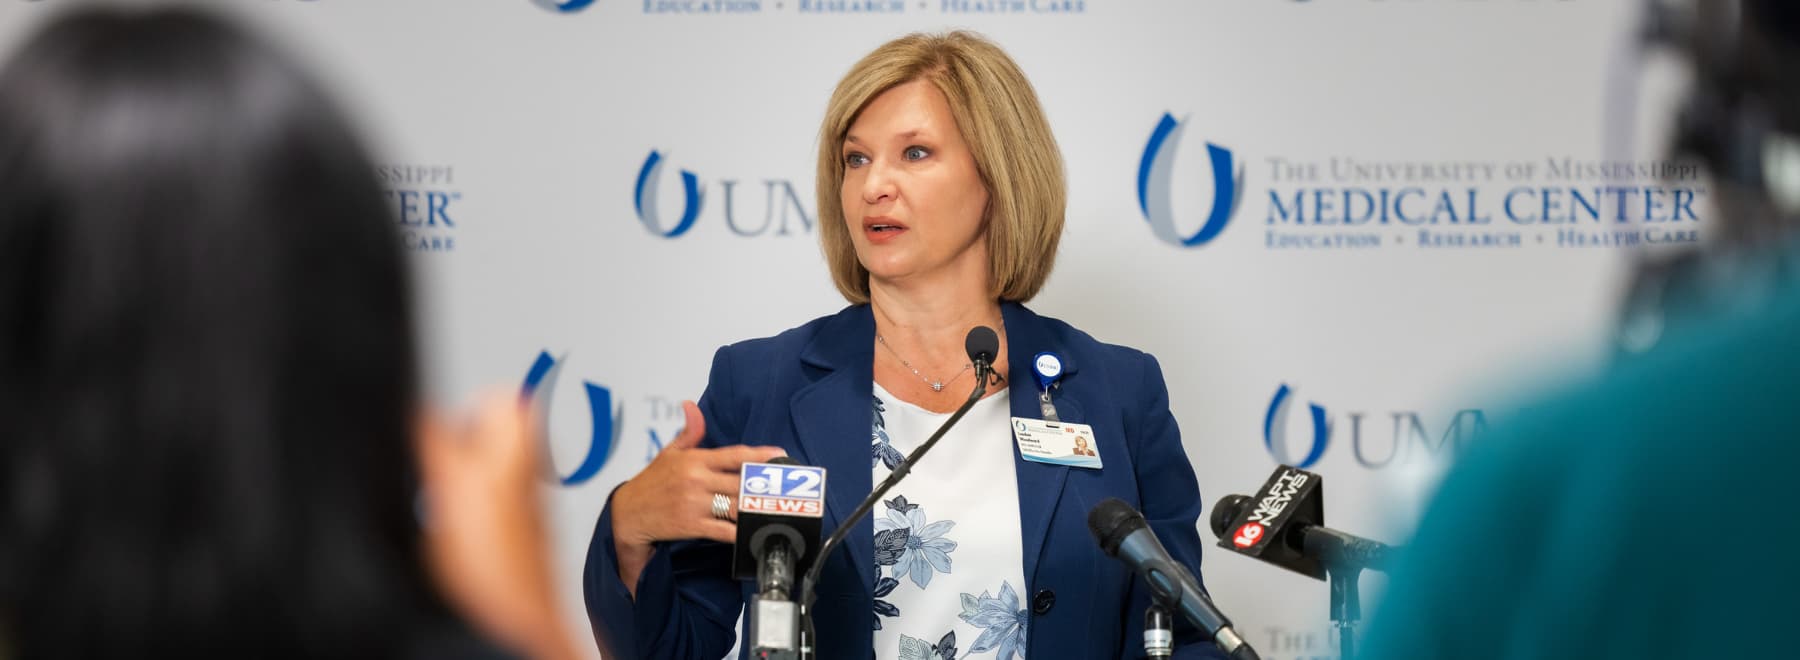 Dr. LouAnn Woodward, vice chancellor for health affairs and dean of the School of Medicine, speaks during a press conference.